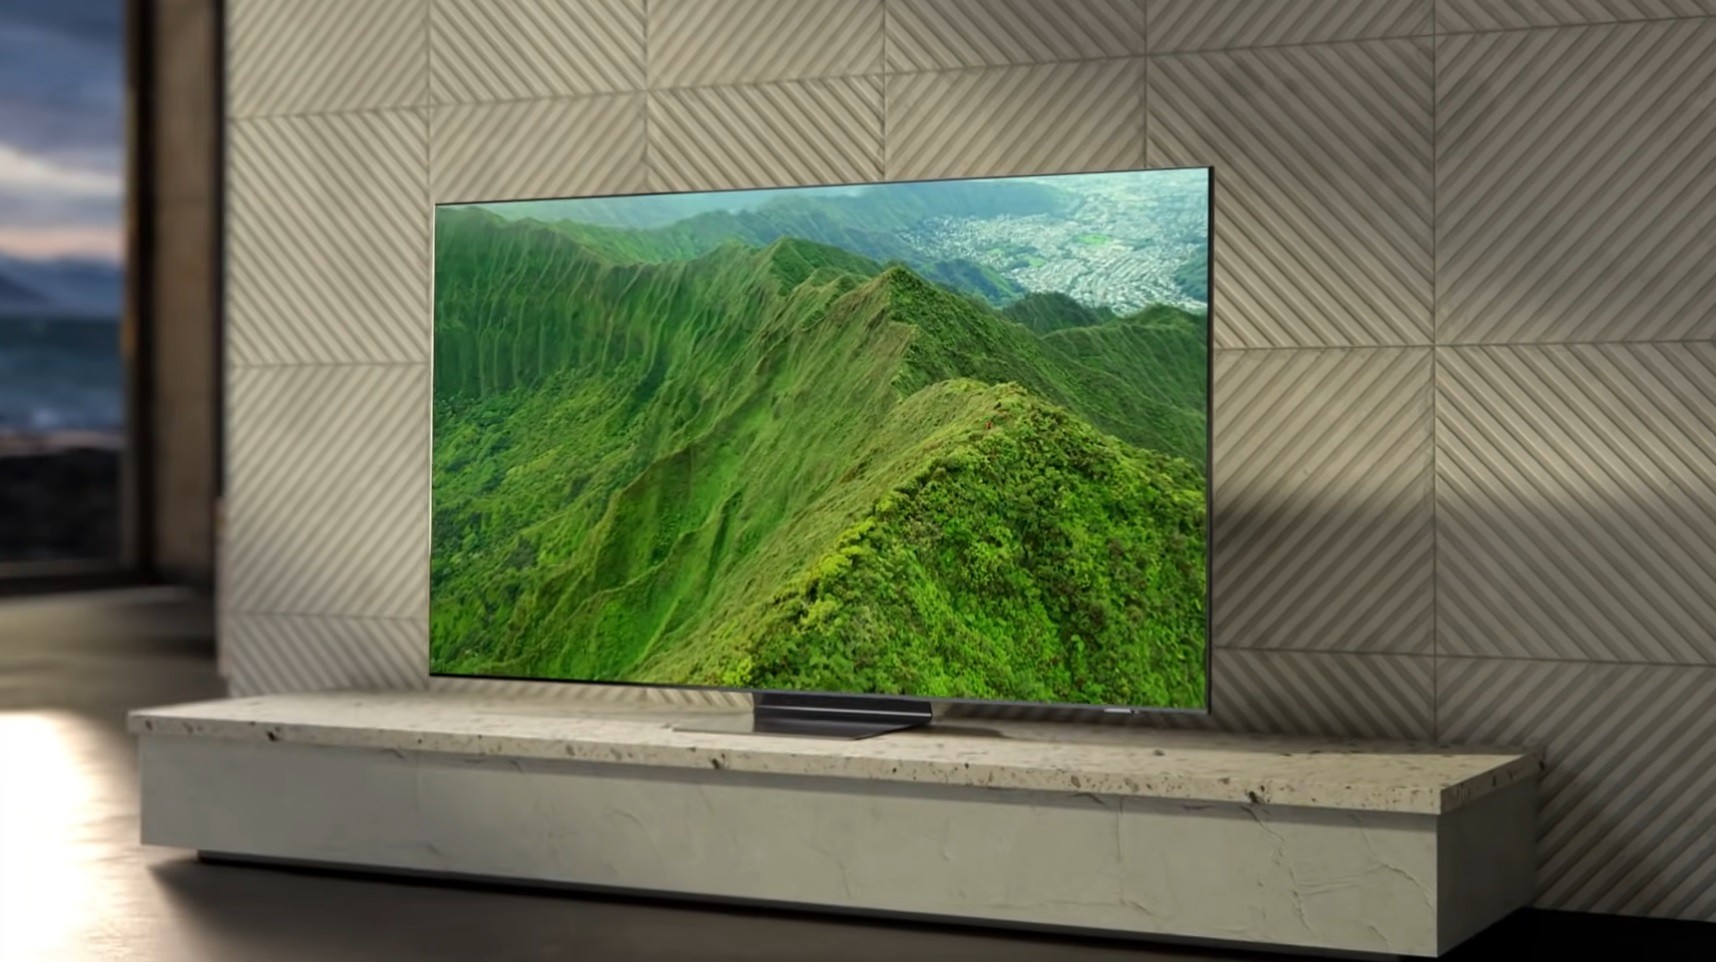 Save up to $1,500 on Samsung’s latest QLED smart TVs